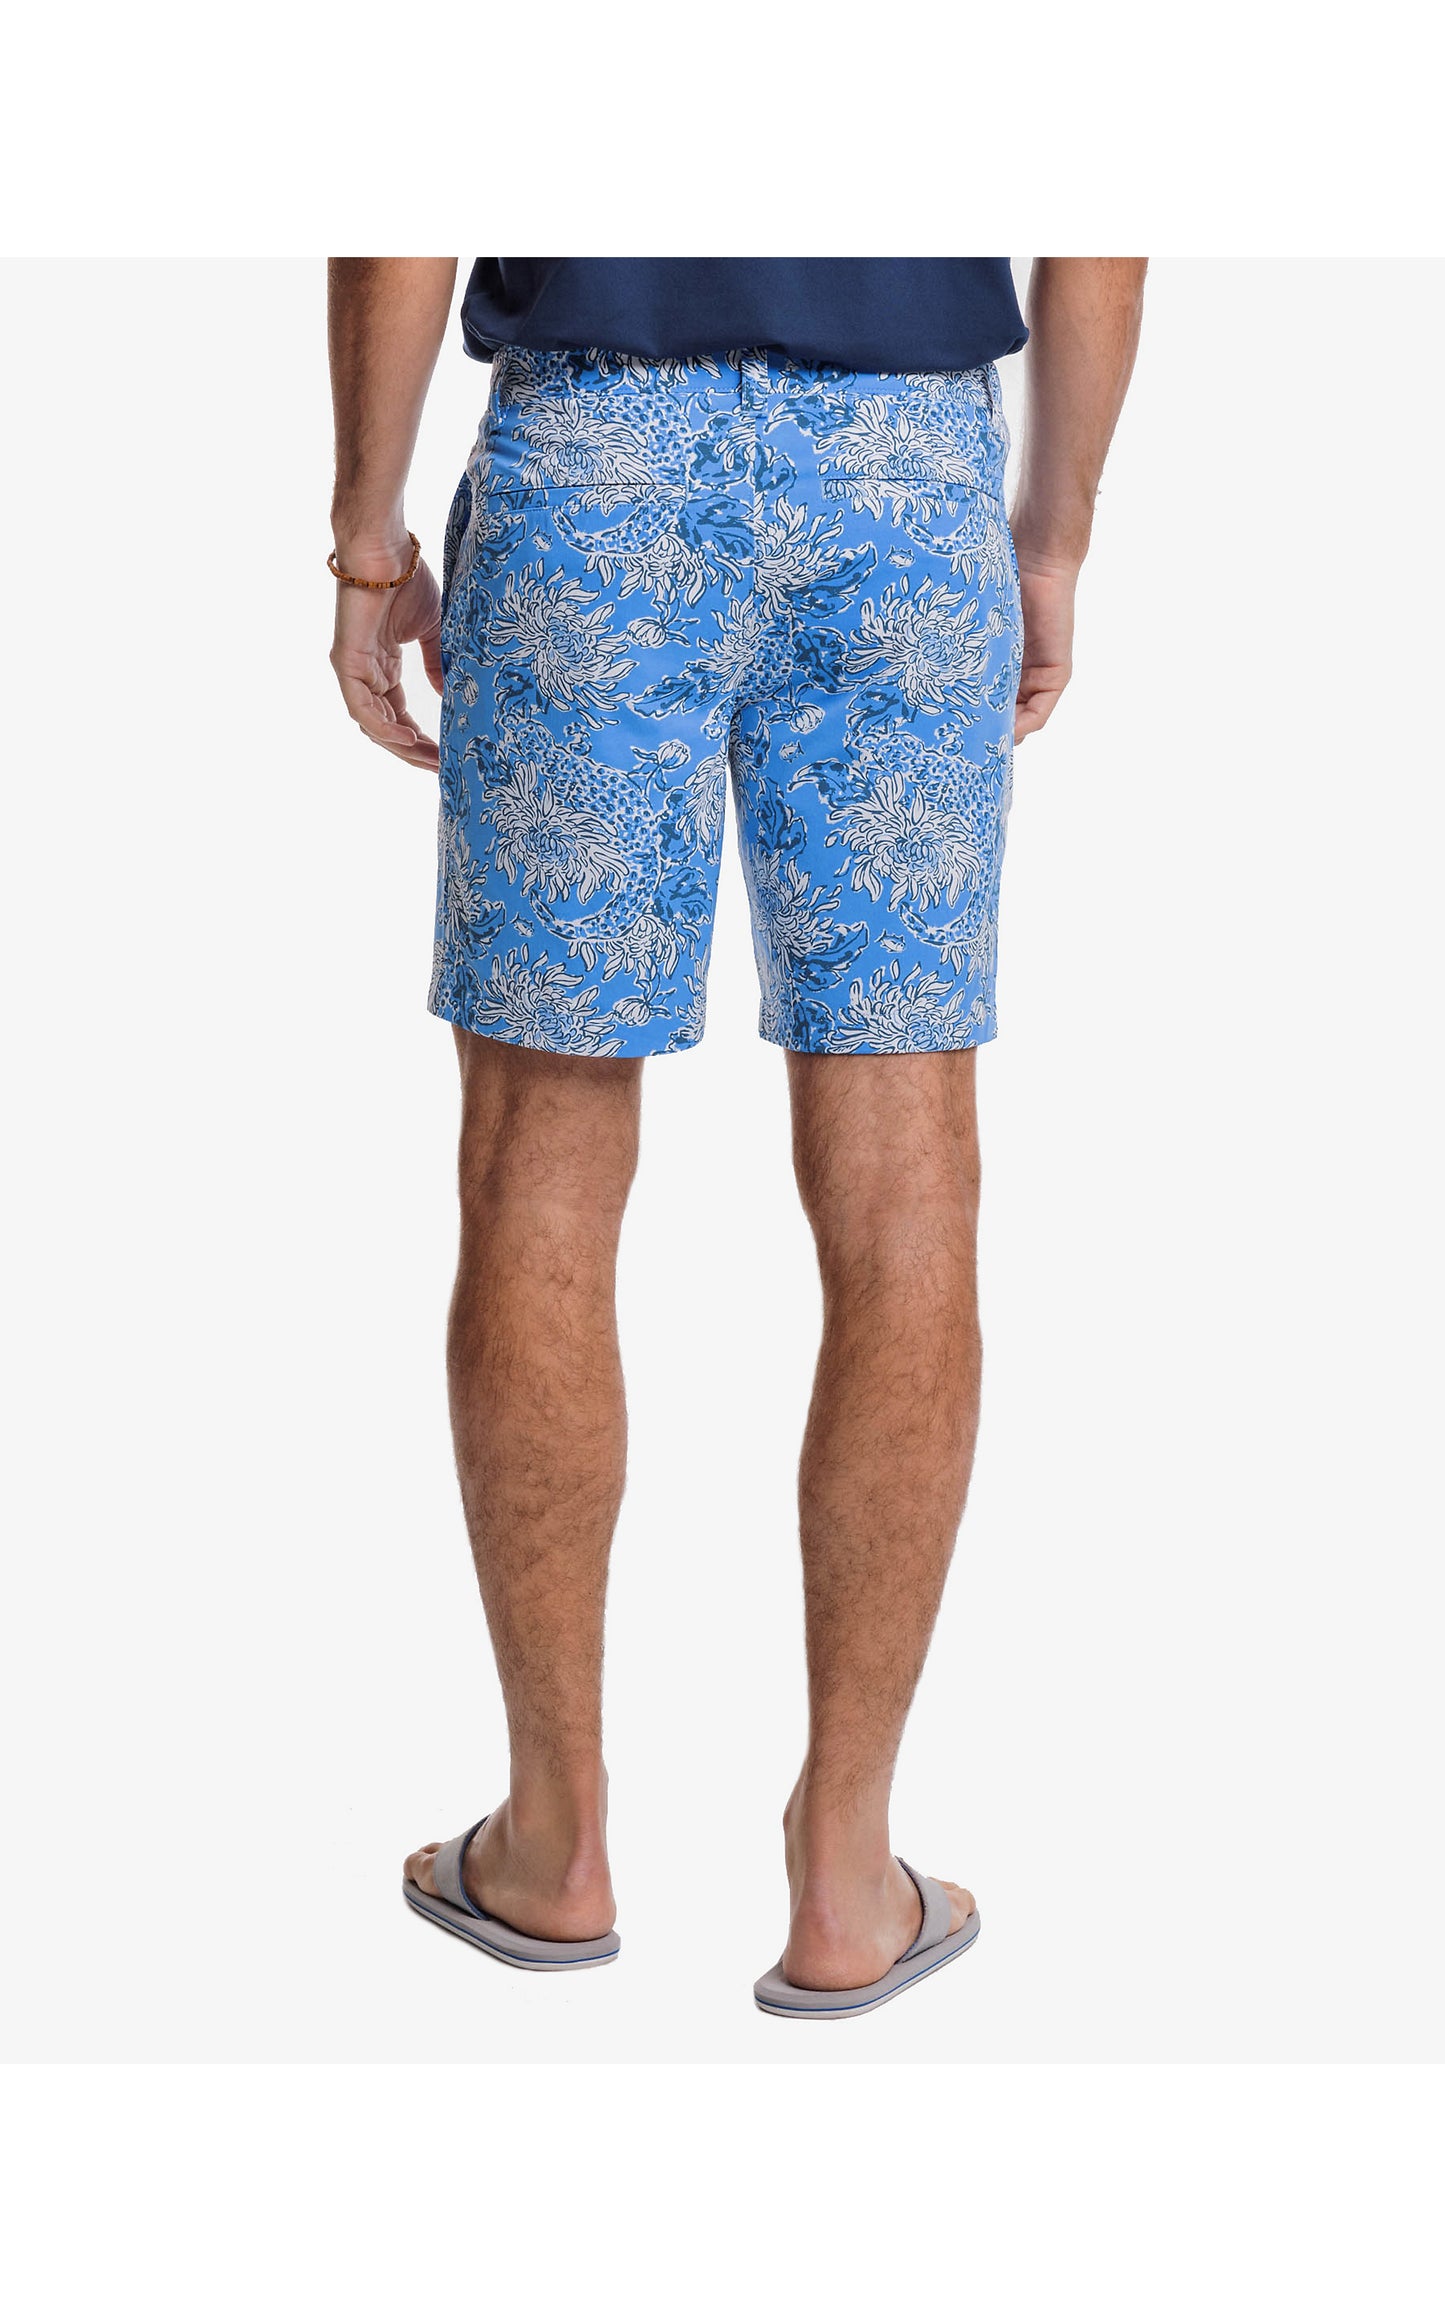 Lilly Pulitzer x Southern Tide: Men's Southern Tide Brrrdie Gulf Shorts in Boca Blue Croc and Lock It